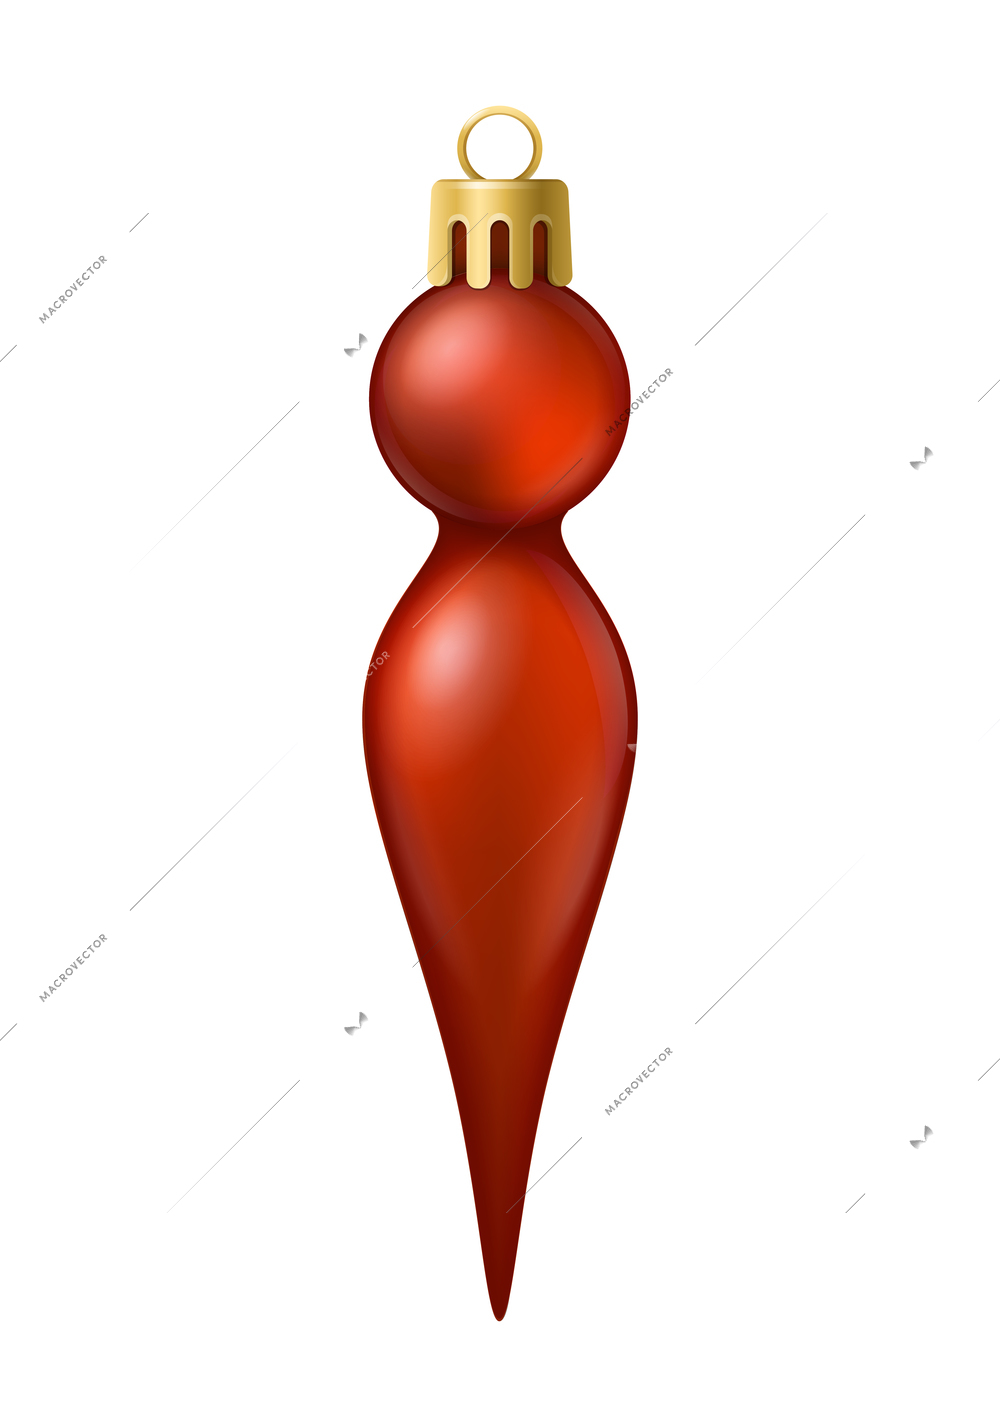 Realistic christmas tree toy composition with ball icicle shaped christmas ornament vector illustration